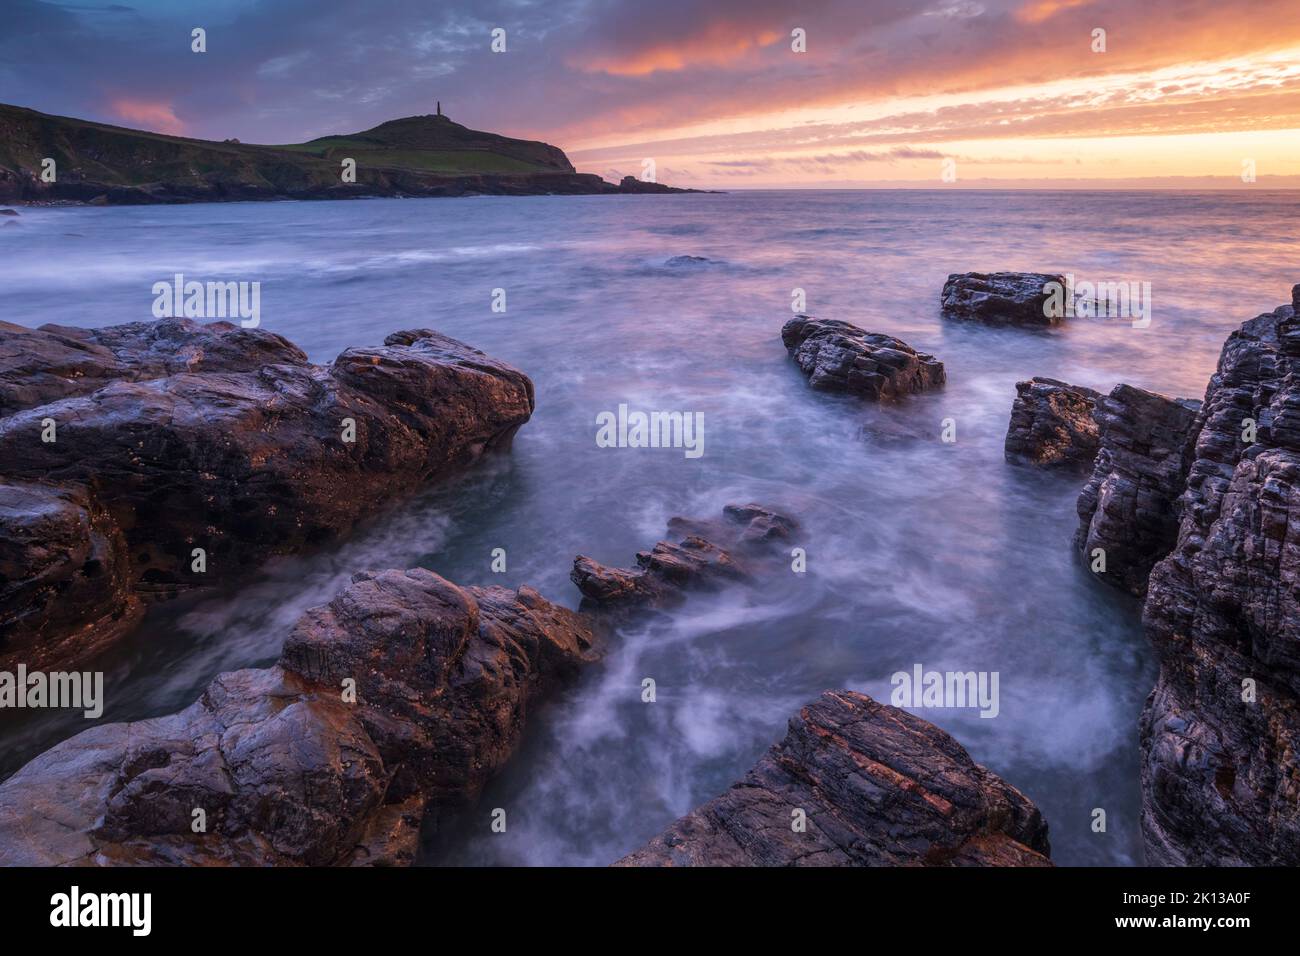 Sunset over Cape Cornwall from the rocky shores of Porth Ledden, Cornwall, England, United Kingdom, Europe Stock Photo